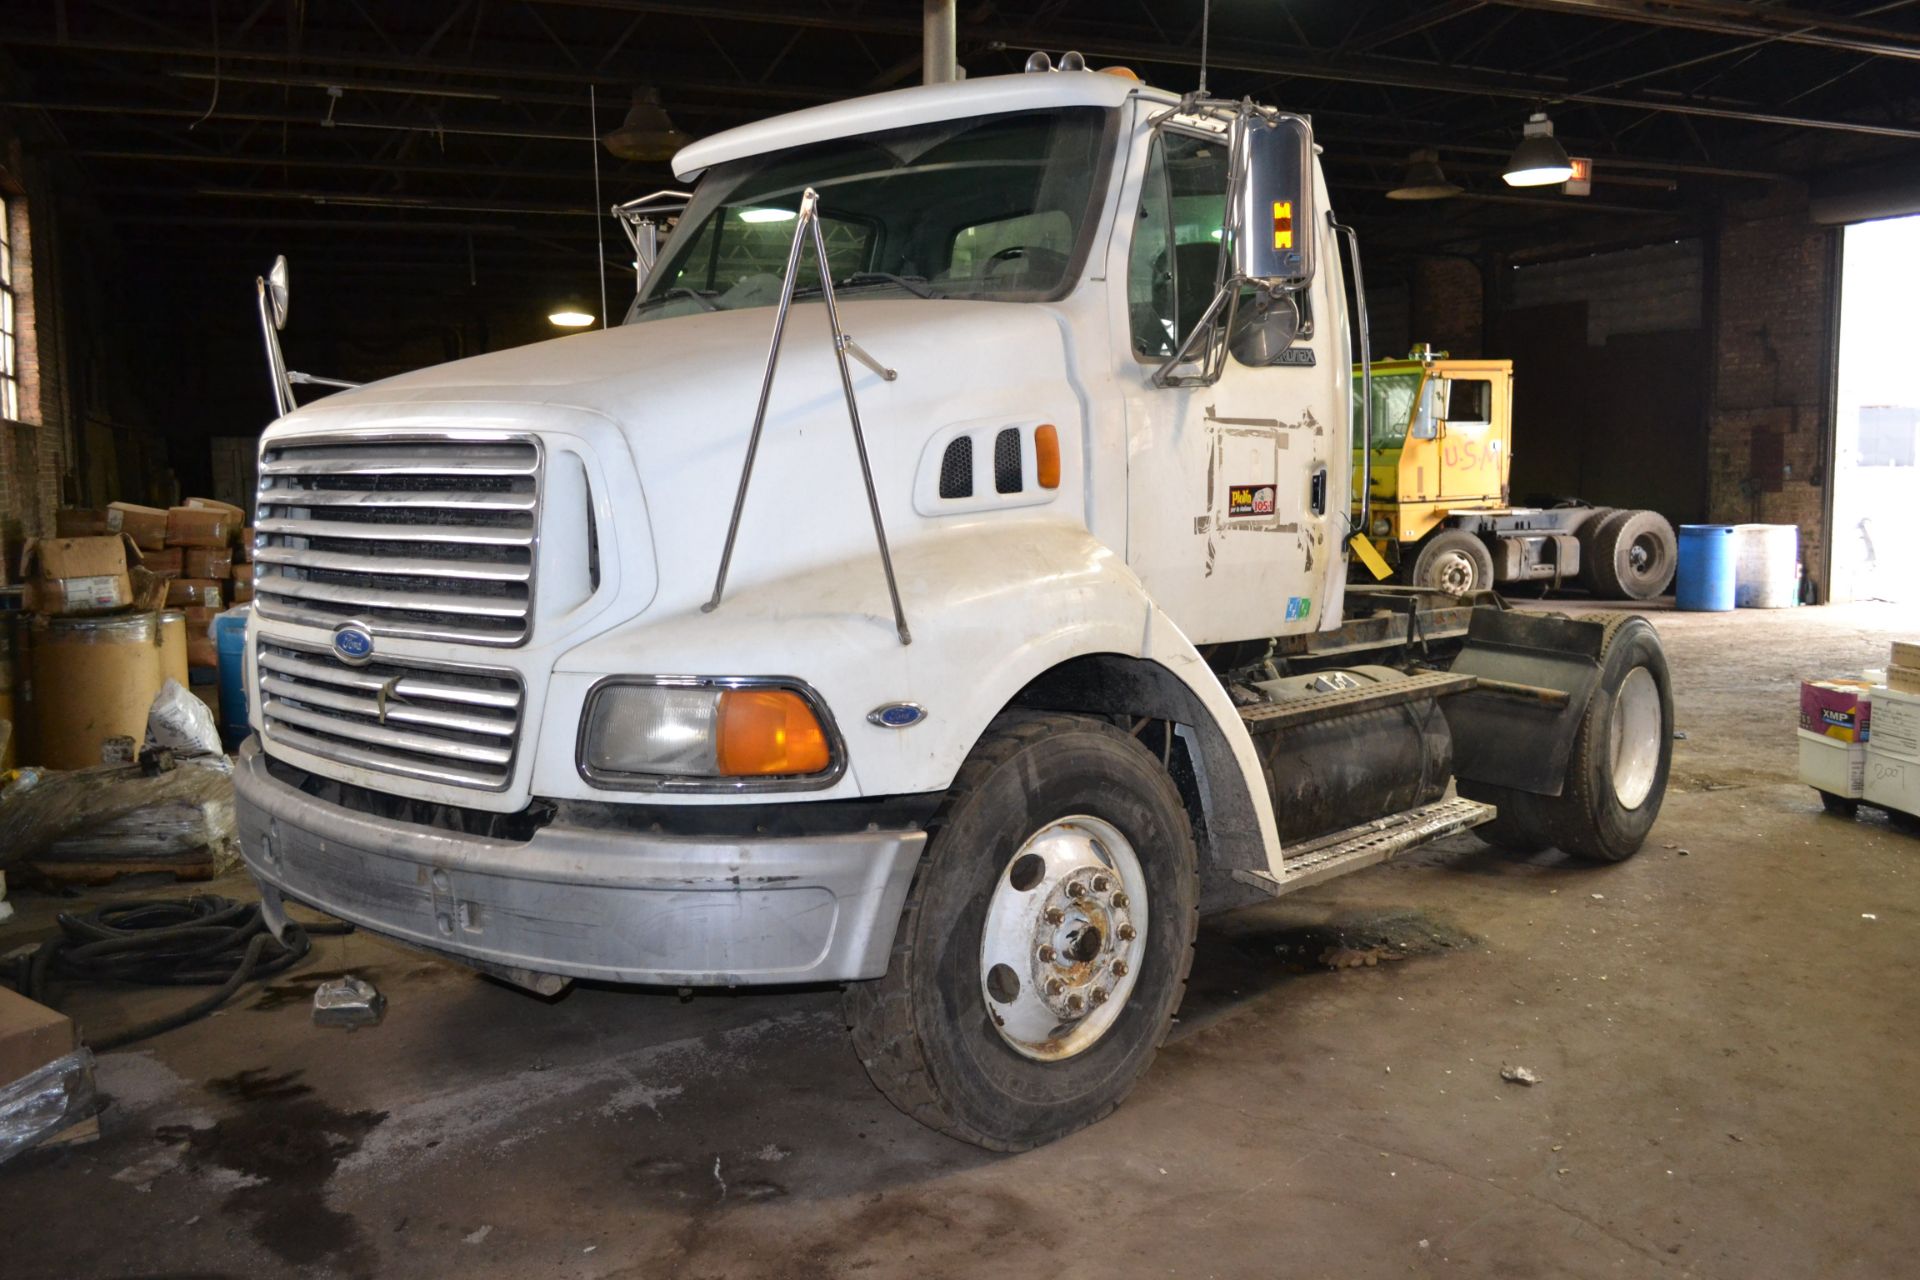 1997 Ford Aeromax Single-Axle Spotter Tractor Conventional H A9513 , VIN 1FTYY92P7VVA29712